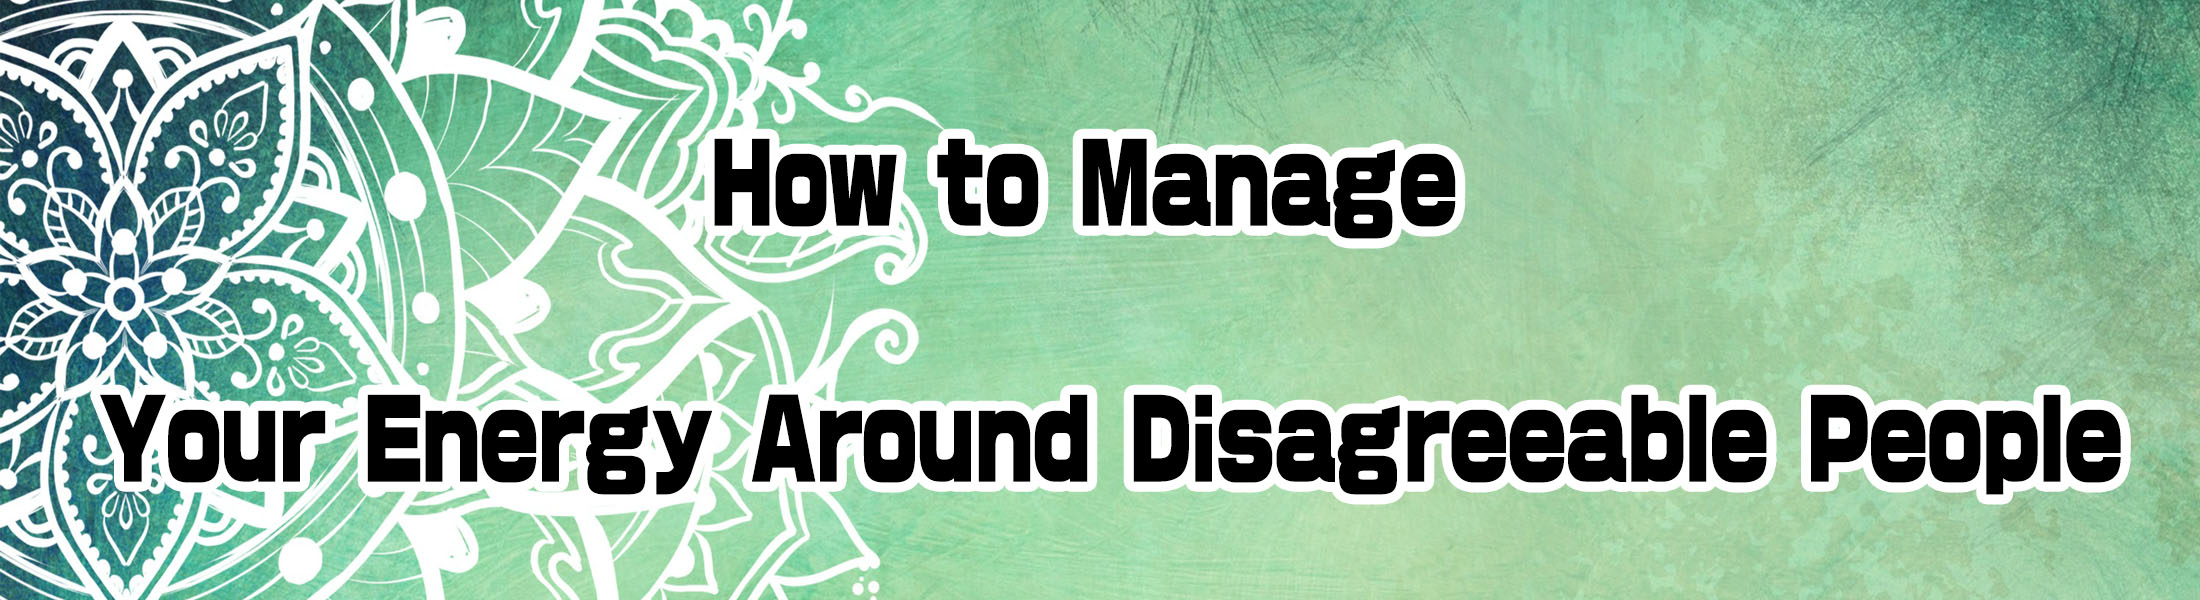 How to Manage Your Energy Around Disagreeable People